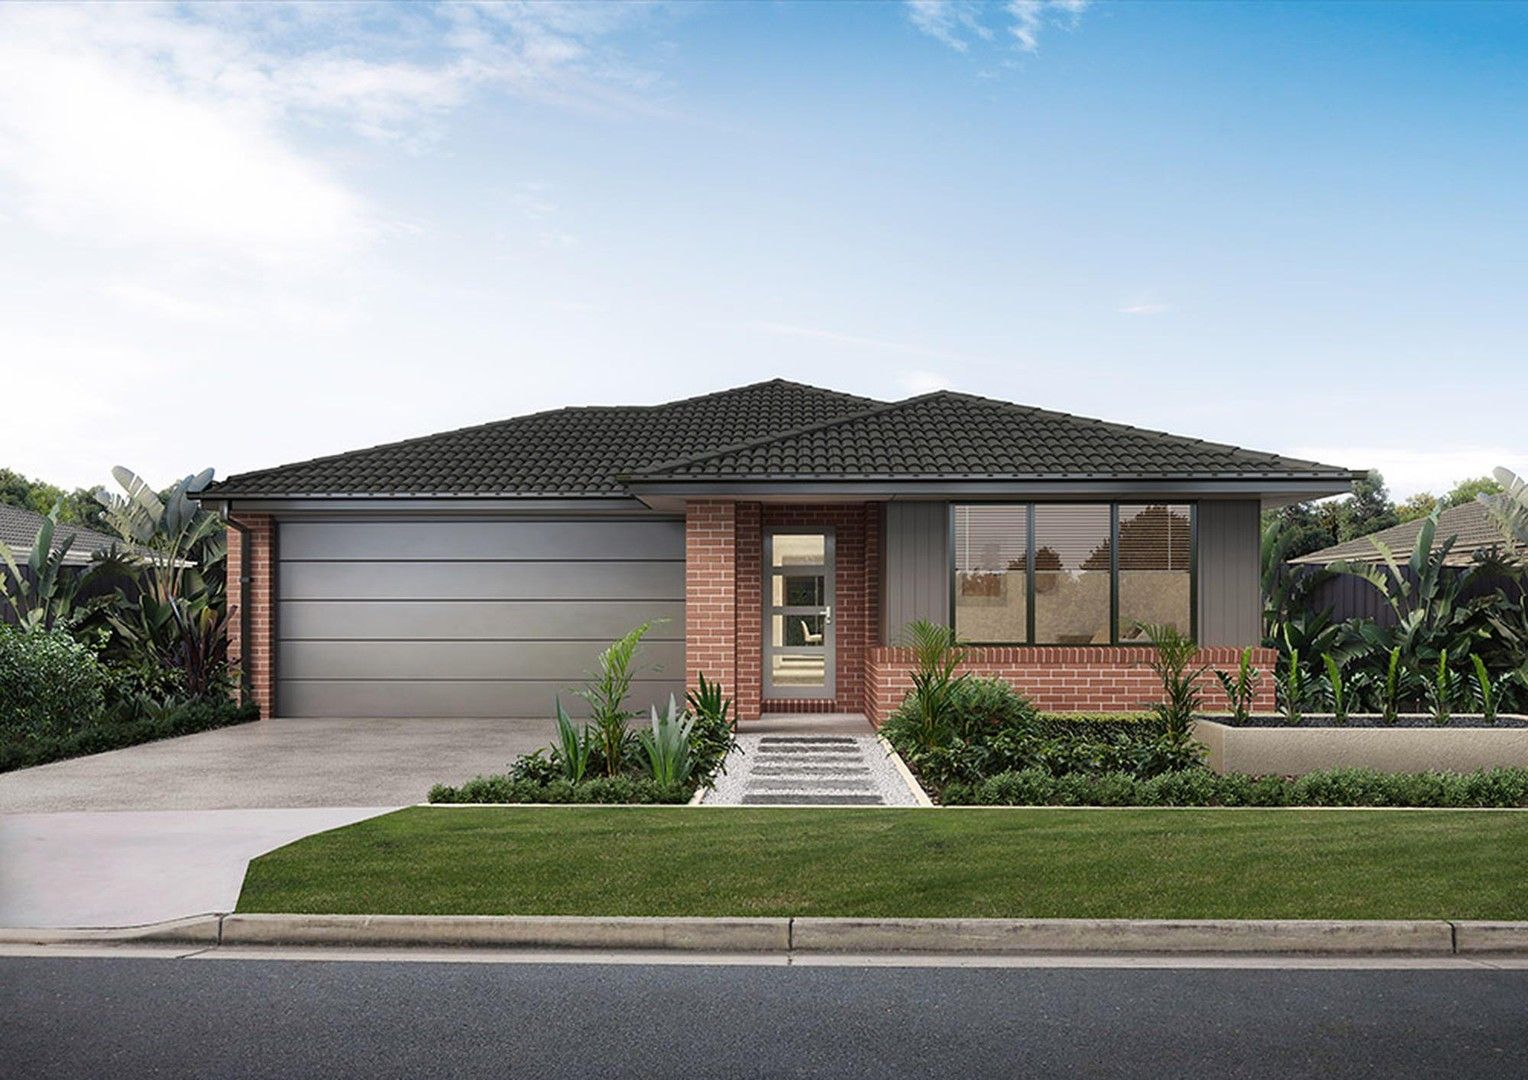 4 bedrooms New House & Land in 2416 Riverfield Square Estate CLYDE NORTH VIC, 3978